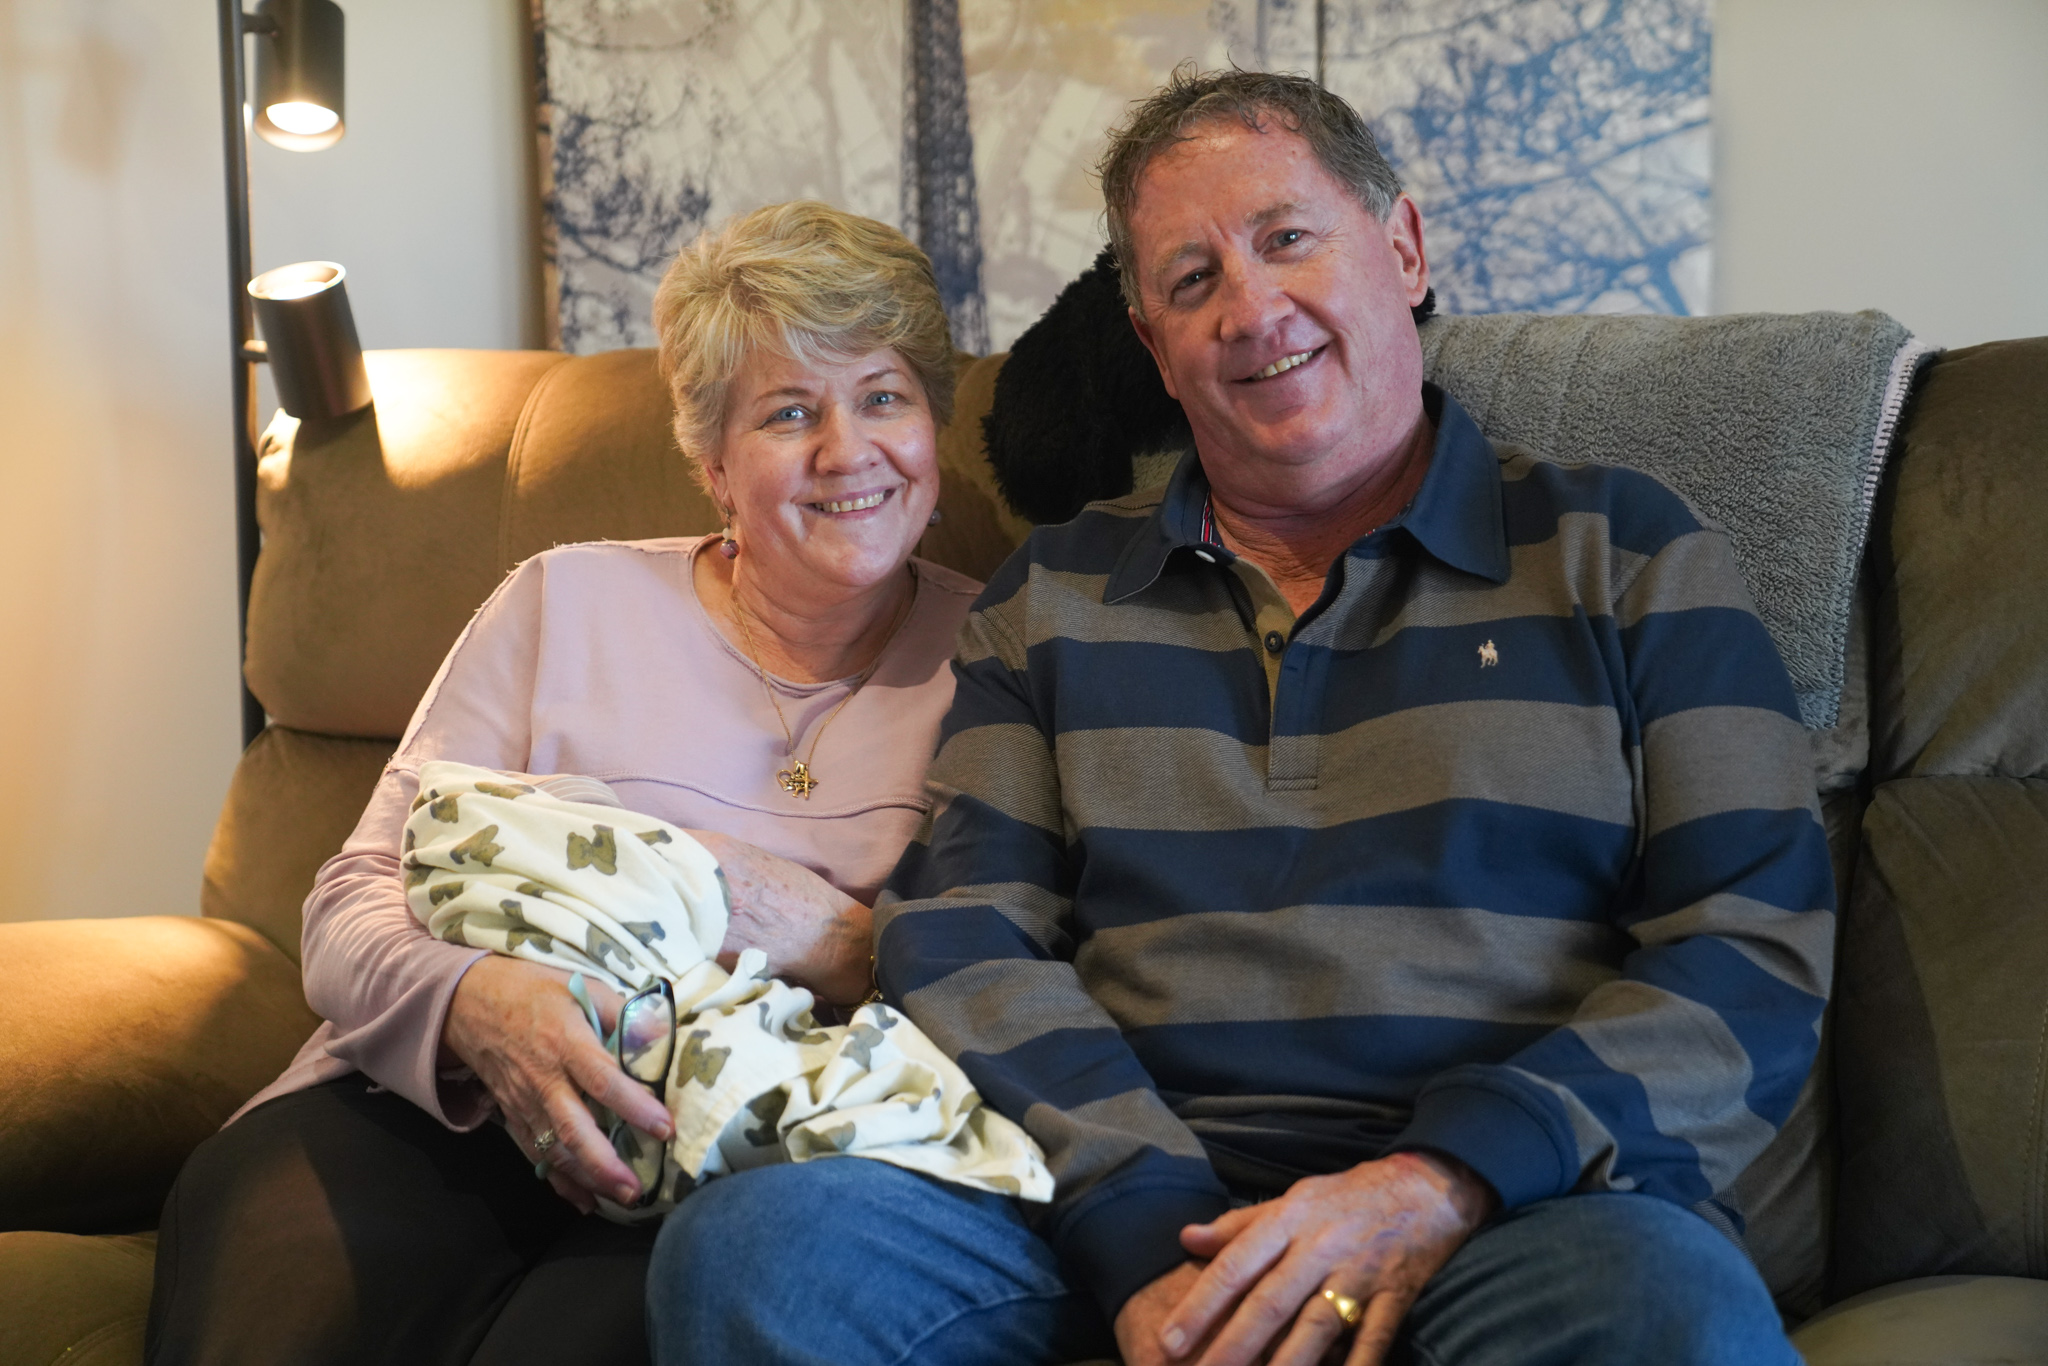 GIVING BACK: Riverland retirees Deb and Peter Kennedy have welcomed vulnerable children, including babies, into their home after becoming foster carers with ac.care and urged other caring adults to also consider providing safe homes and positive relationships for local children in need of support.